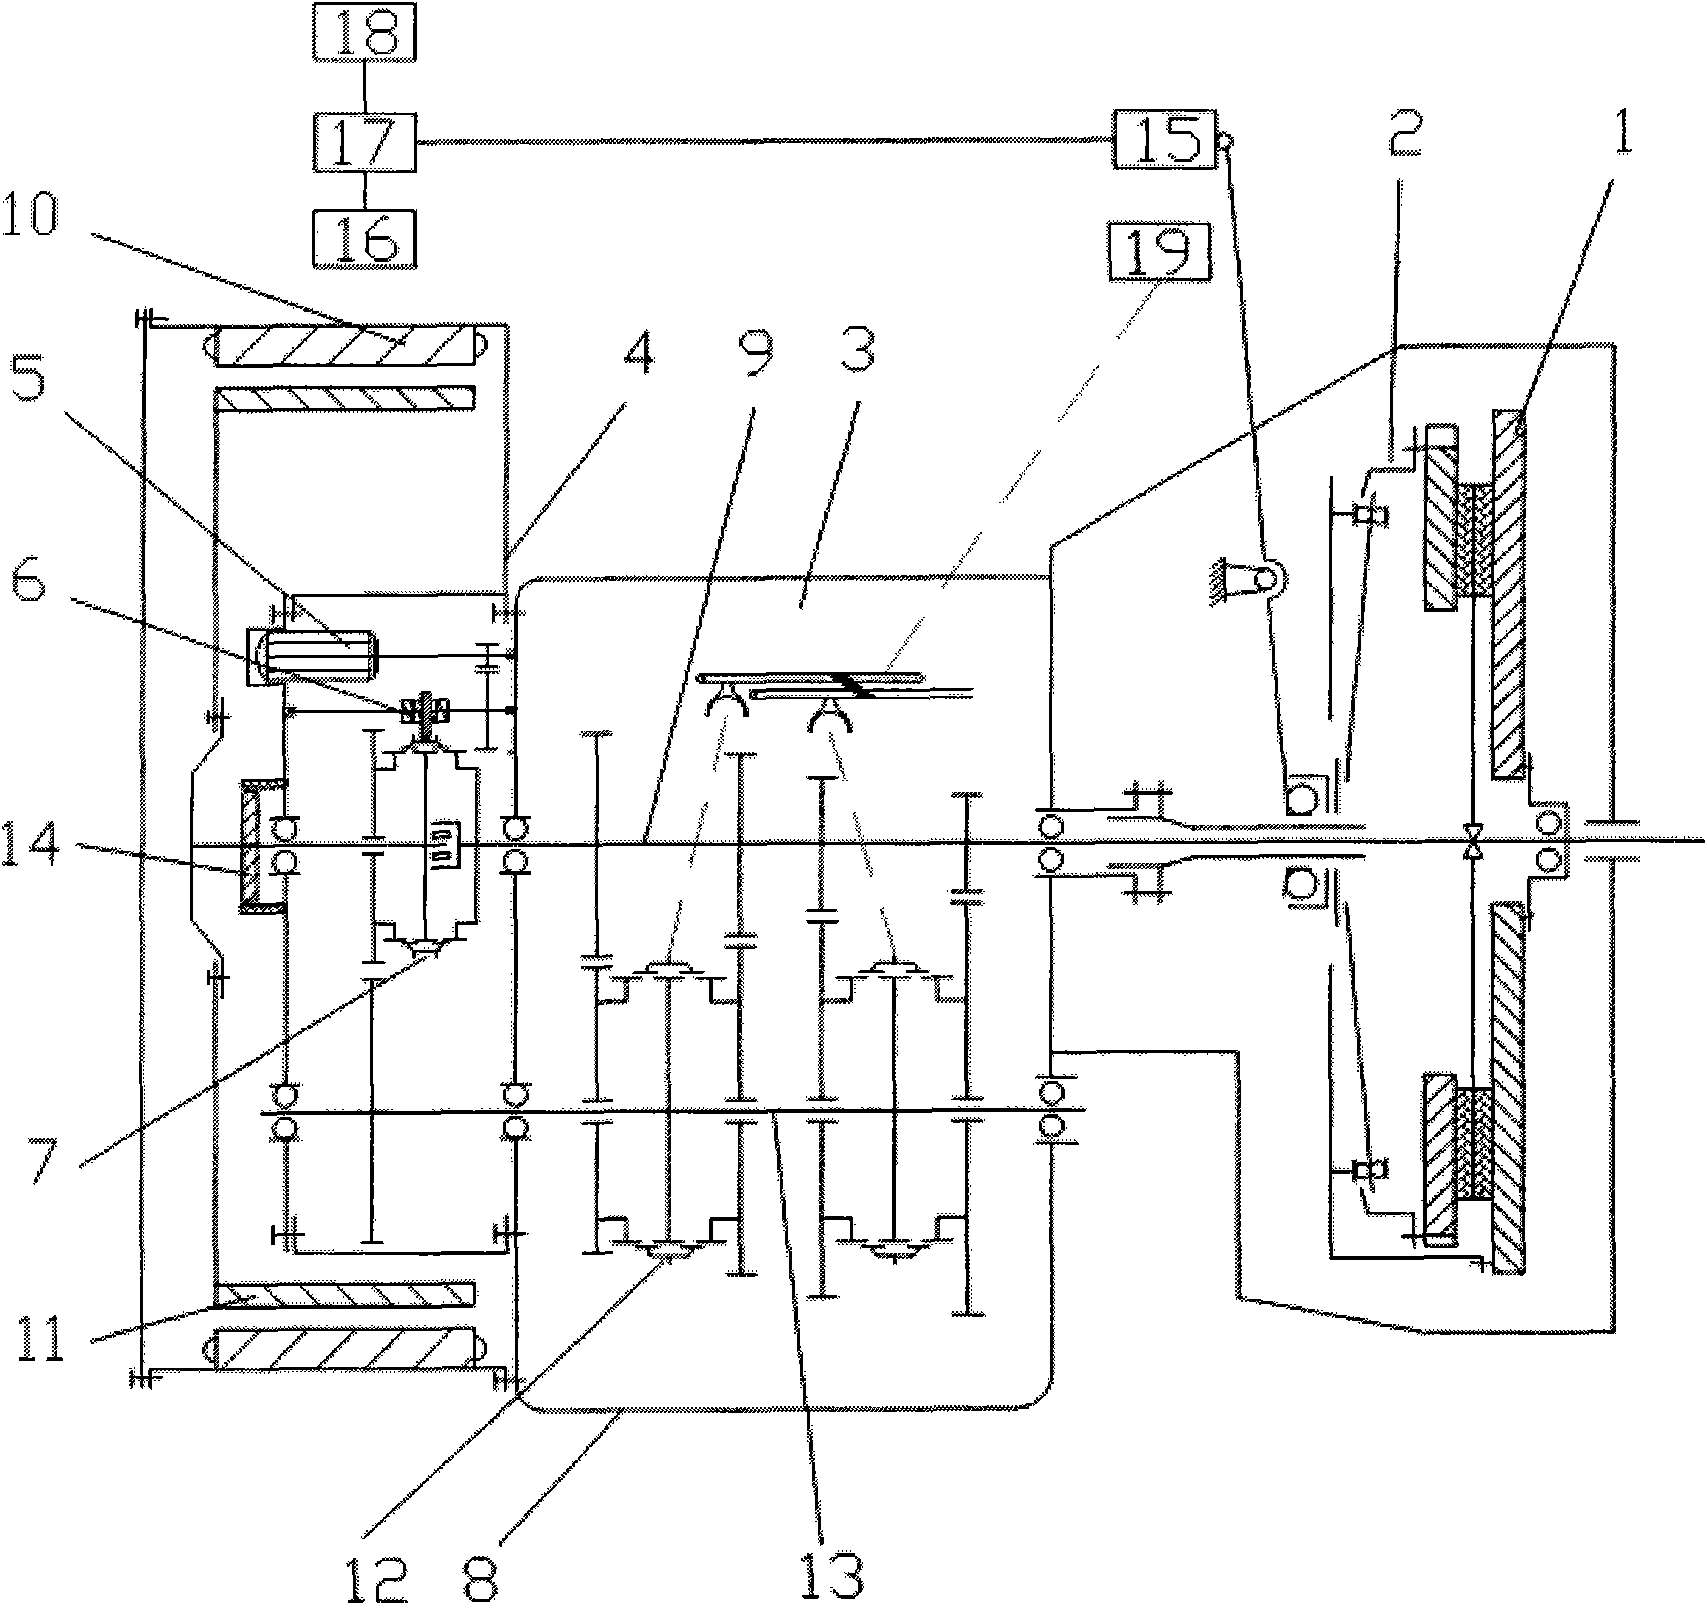 Active transmission device for hybrid electric vehicle